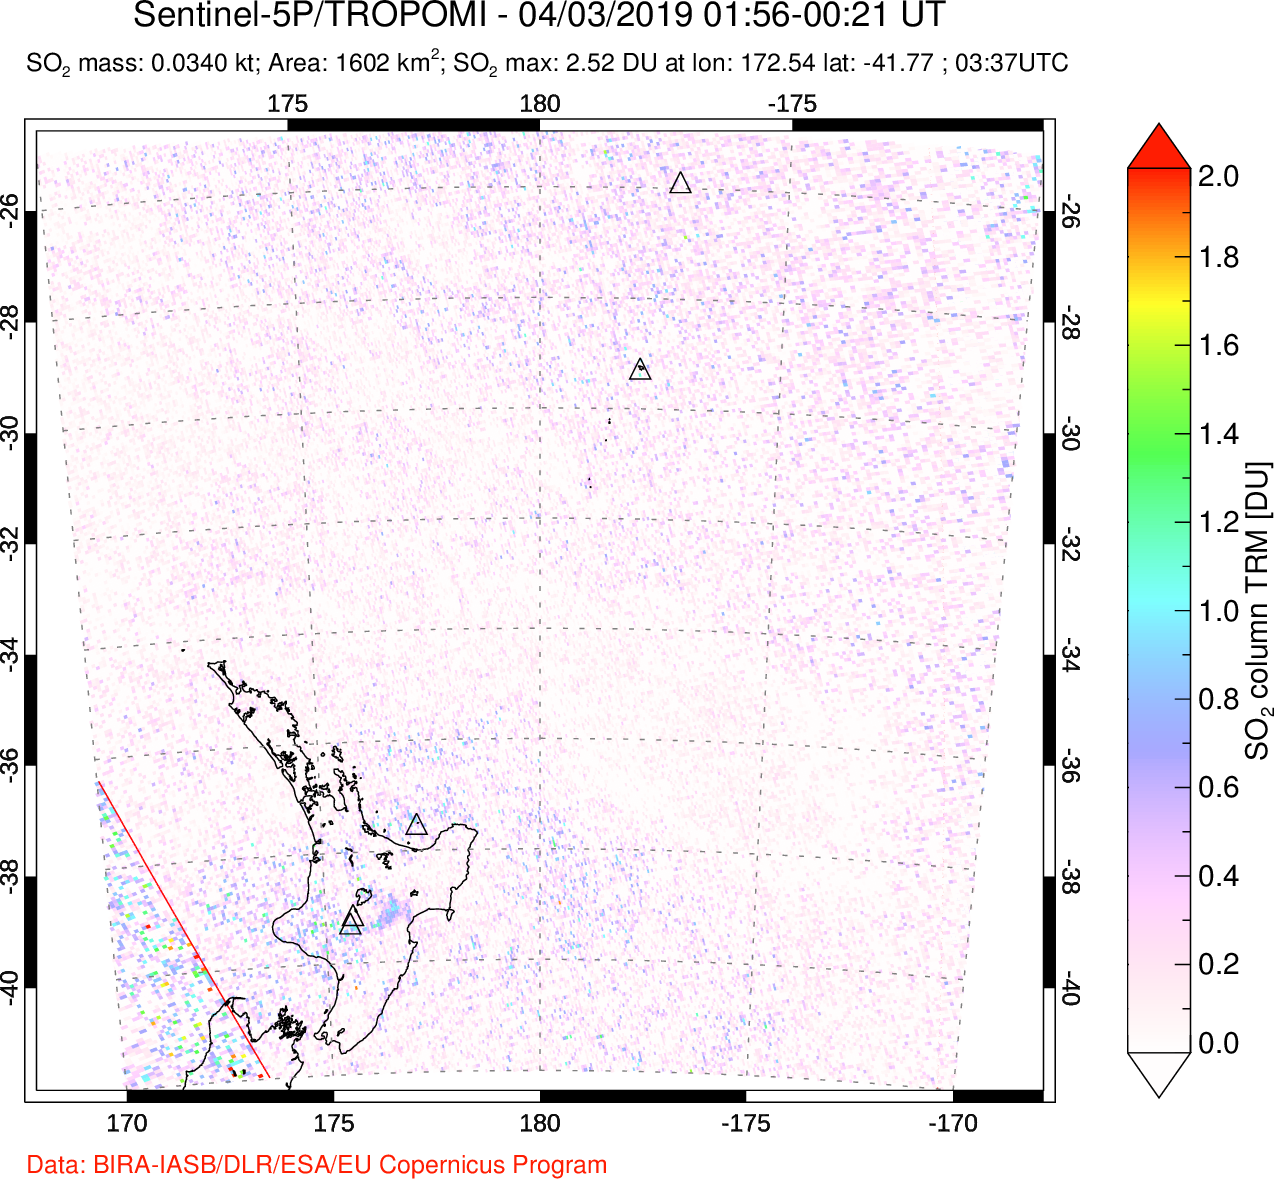 A sulfur dioxide image over New Zealand on Apr 03, 2019.